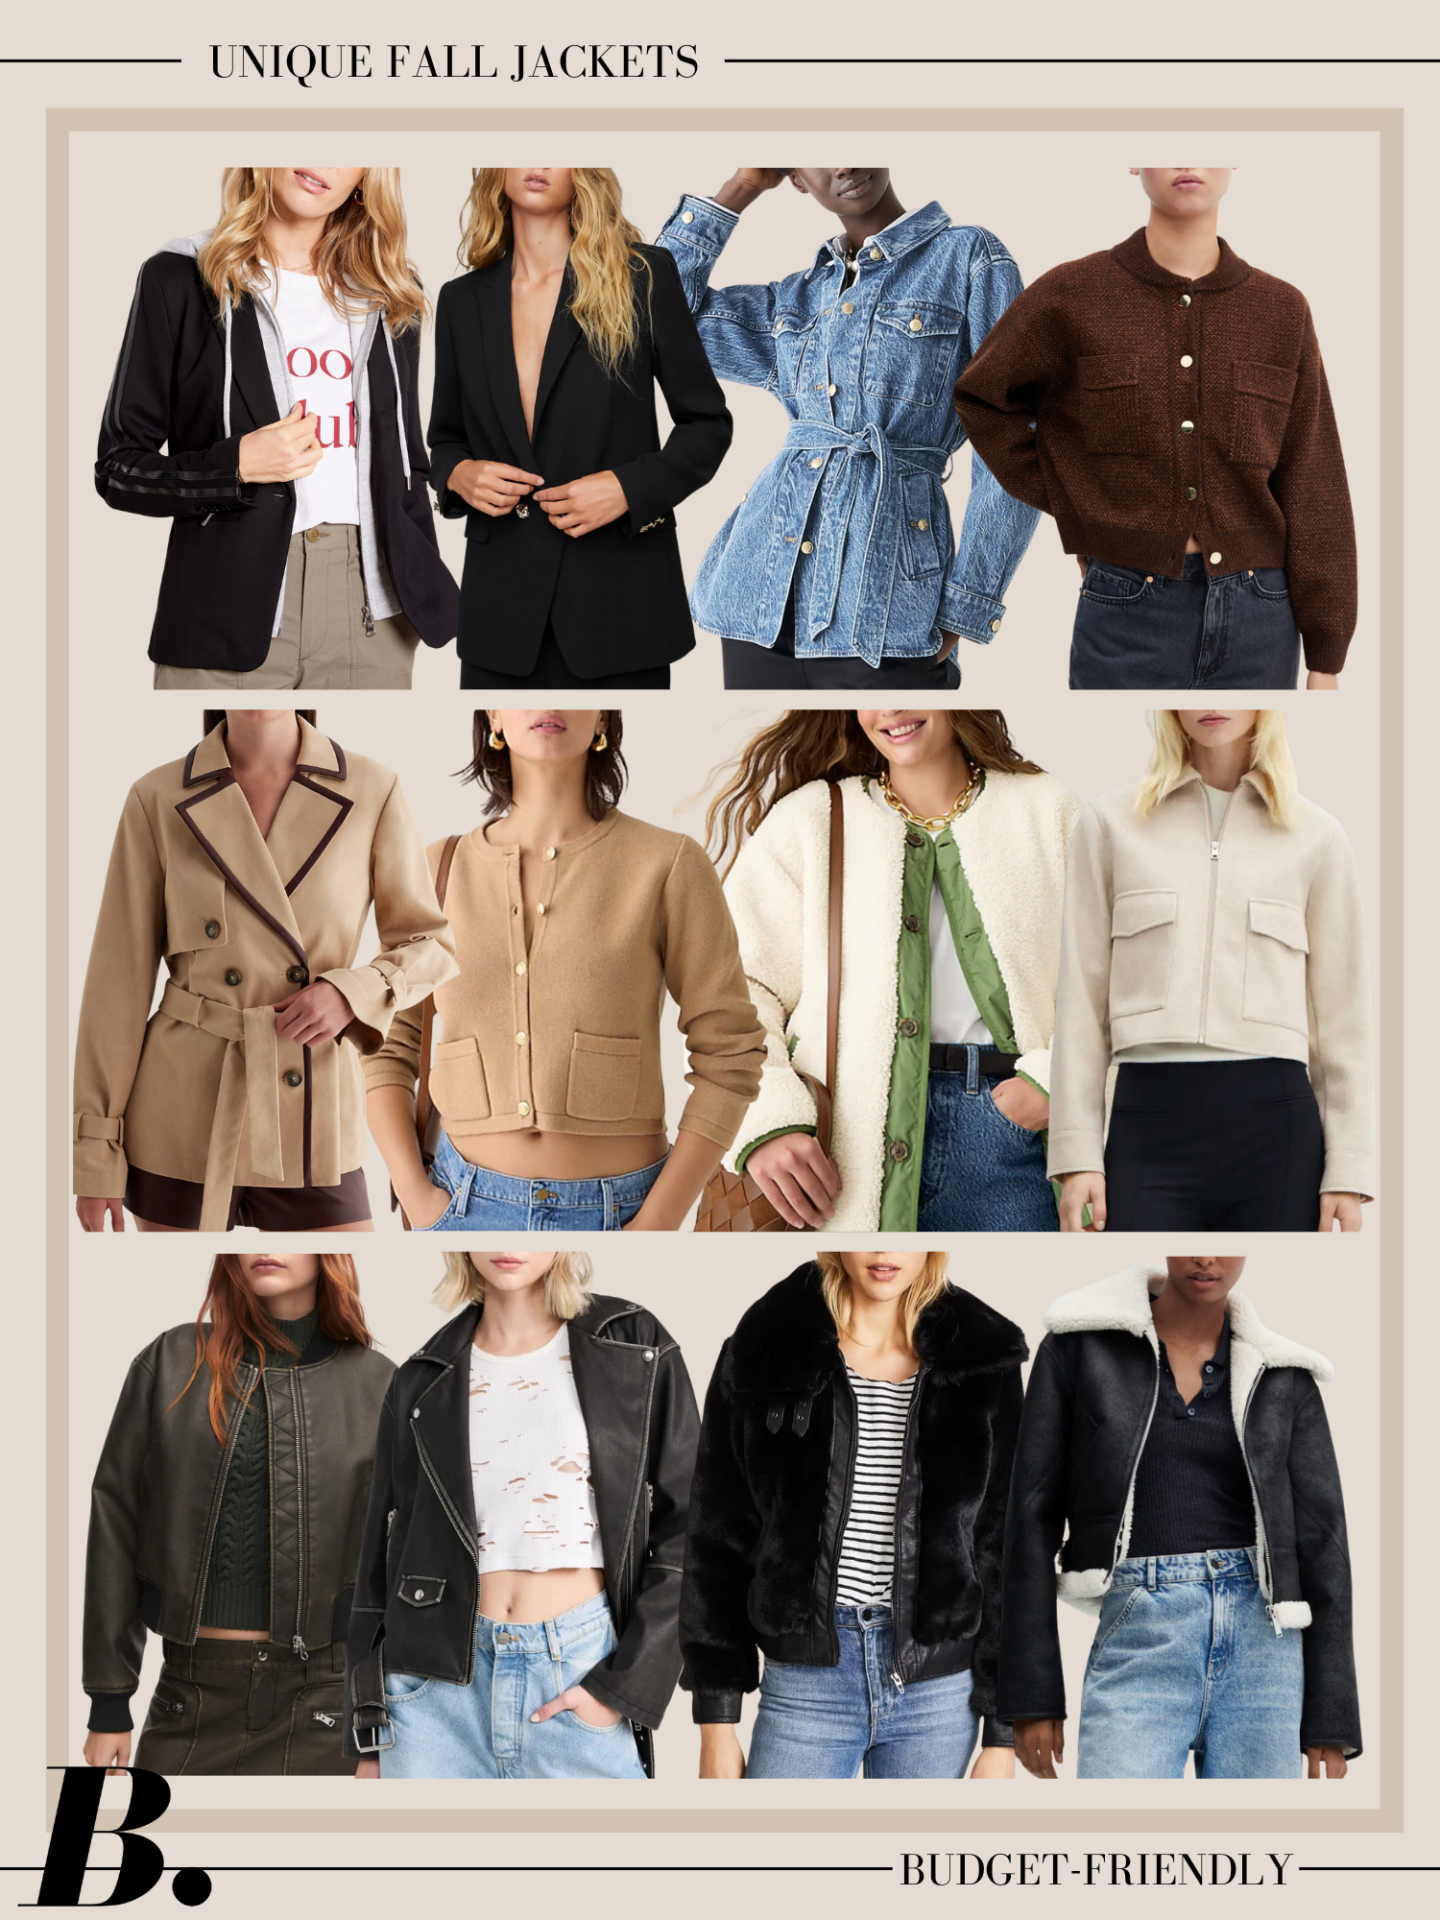 affordable fall jackets, fall jackets, lightweight jackets, denim jackets for fall, blazers for fall, bomber jackets for fall, faux fur jackets for fall, leather jackets for fall, puffer jackets for fall, quilted jackets for fall, best fall jackets, stylish fall jackets, unique fall jackets, fall jackets women, womens casual fall jackets, fall jackets 2023, winter fall jackets, womens casual jackets, j. crew fall jackets, mango fall jackets, blanknyc fall jackets, jackets for autumn, trench jackets for fall, lady jackets for fall, what are lady jackets, reversible jackets for fall, best reversible jackets, erin busbee, busbee style, fashion over 40, style over 40